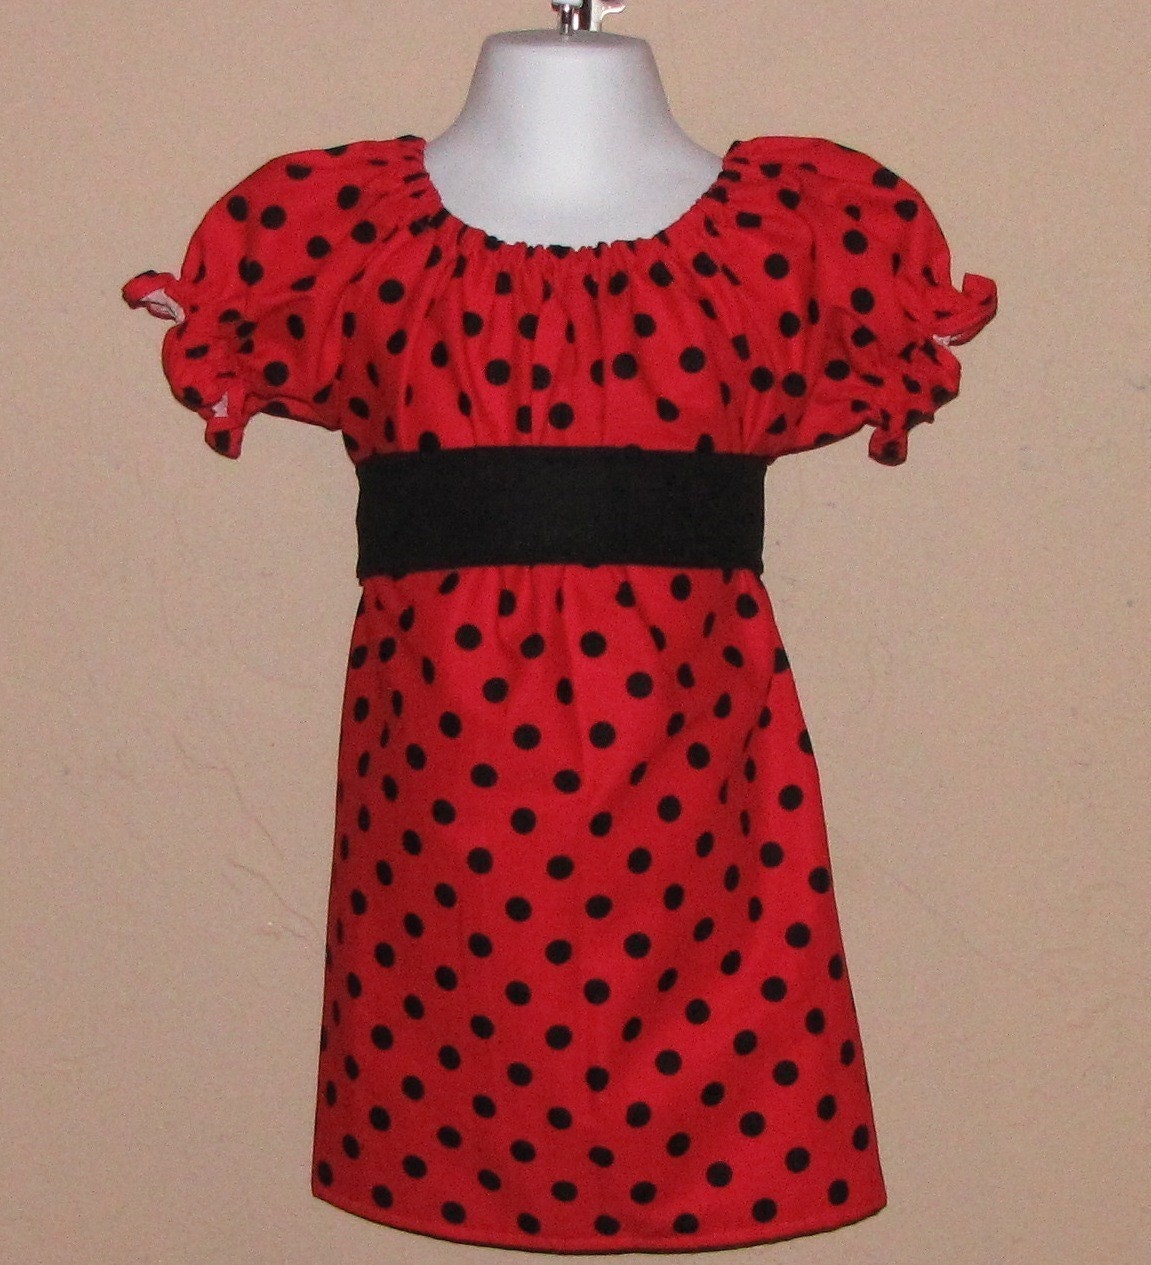 Lady Bug Peasant Dress with Sash 3 6 12 18 month mo 2T 3T 4T 5T 6 7 ..... By Girlie Bows